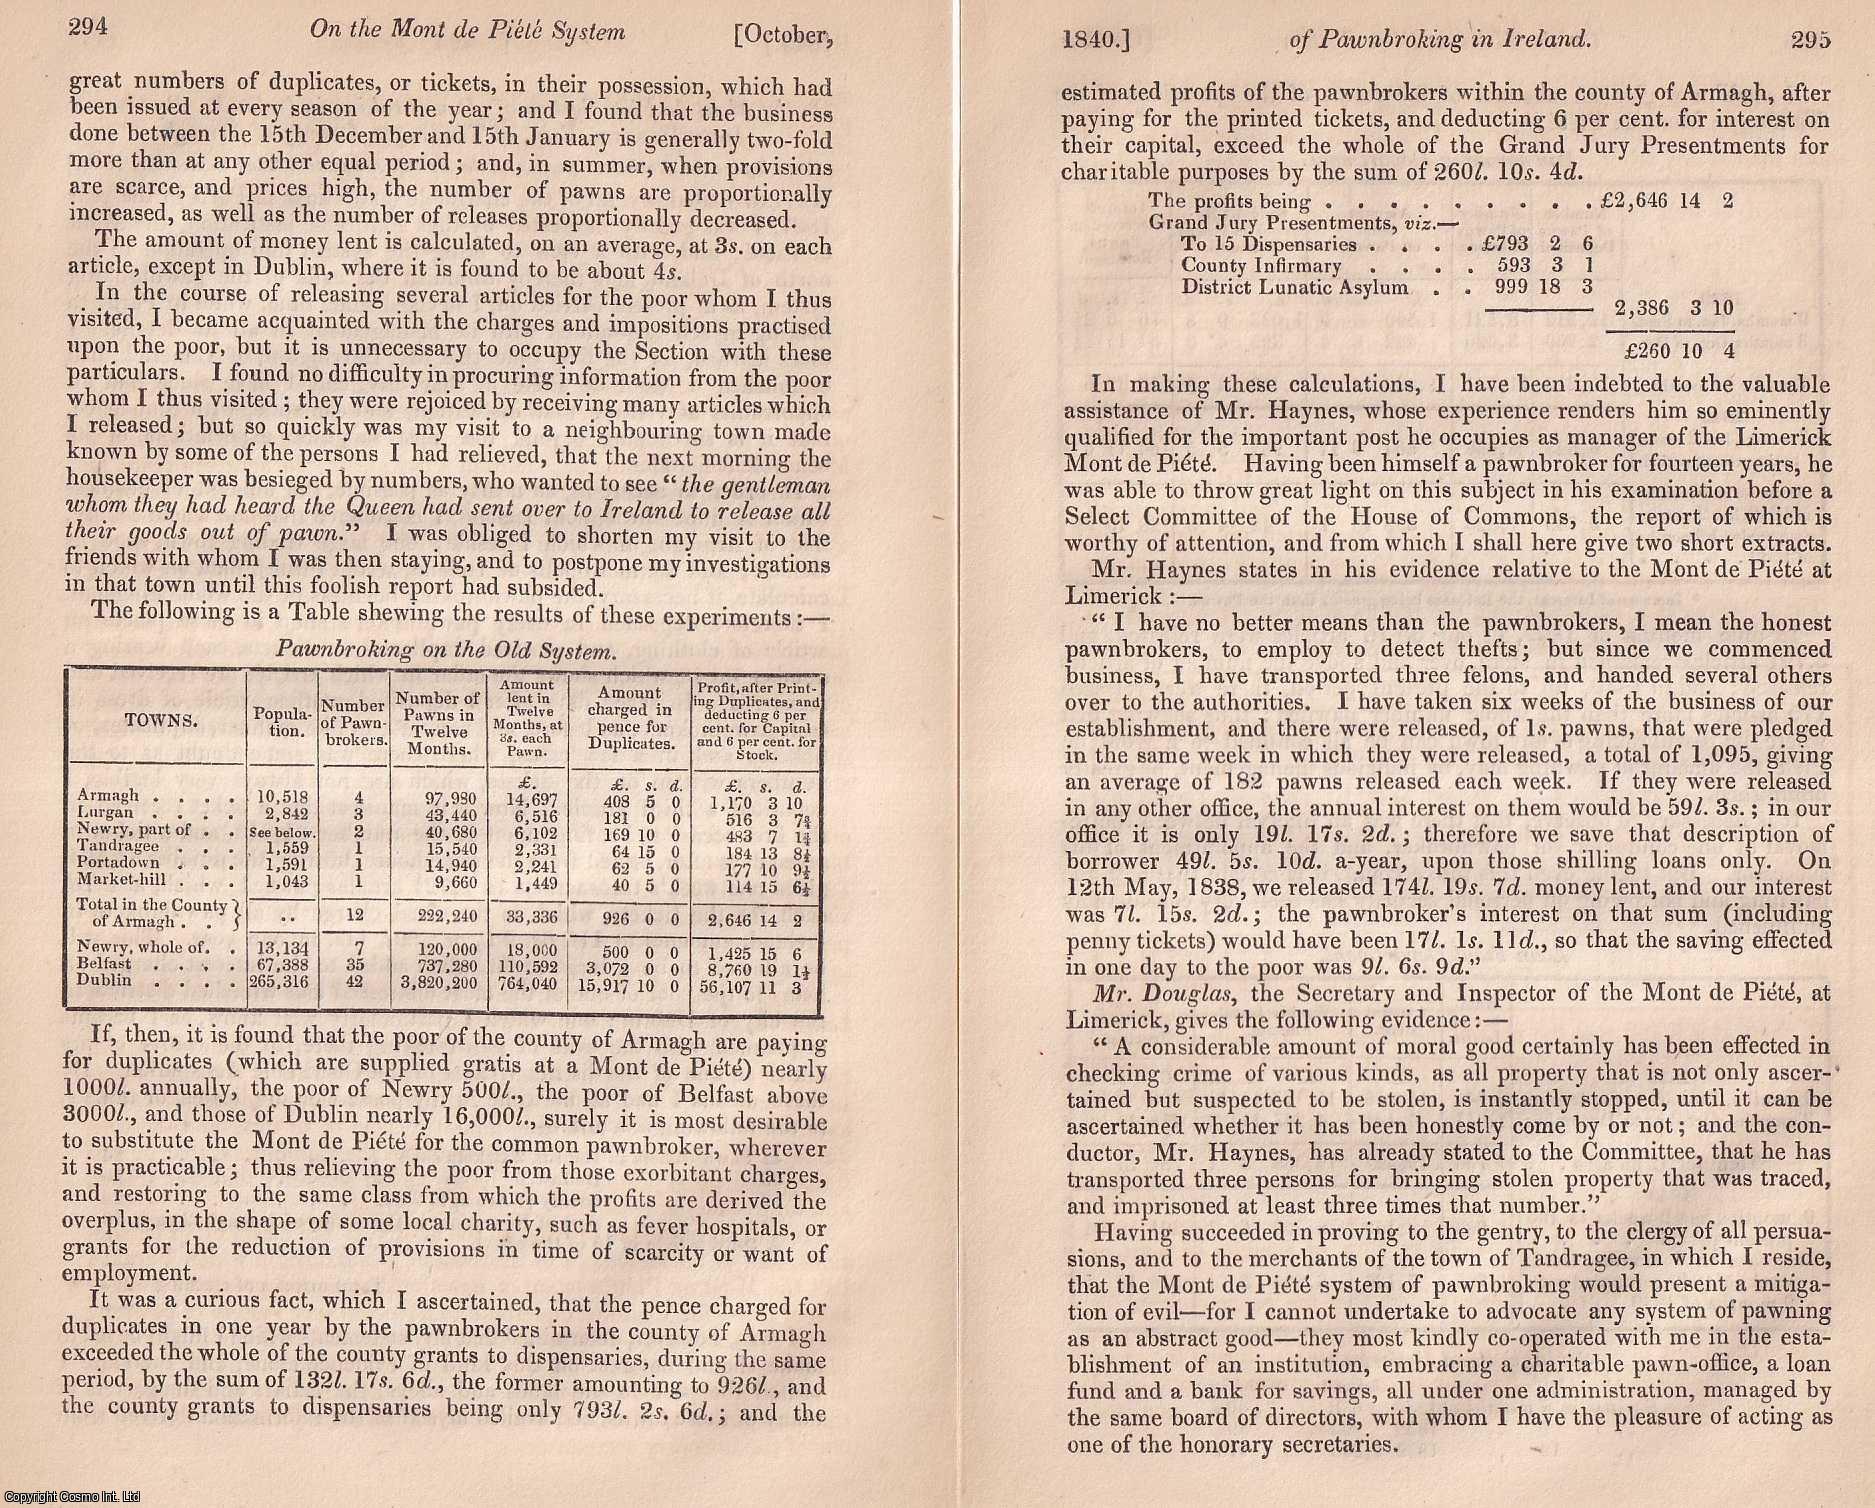 Porter, Henry John. - On the Mont de Piete System of Pawnbroking in Ireland. A rare original article from the Journal of the Royal Statistical Society of London, 1840.